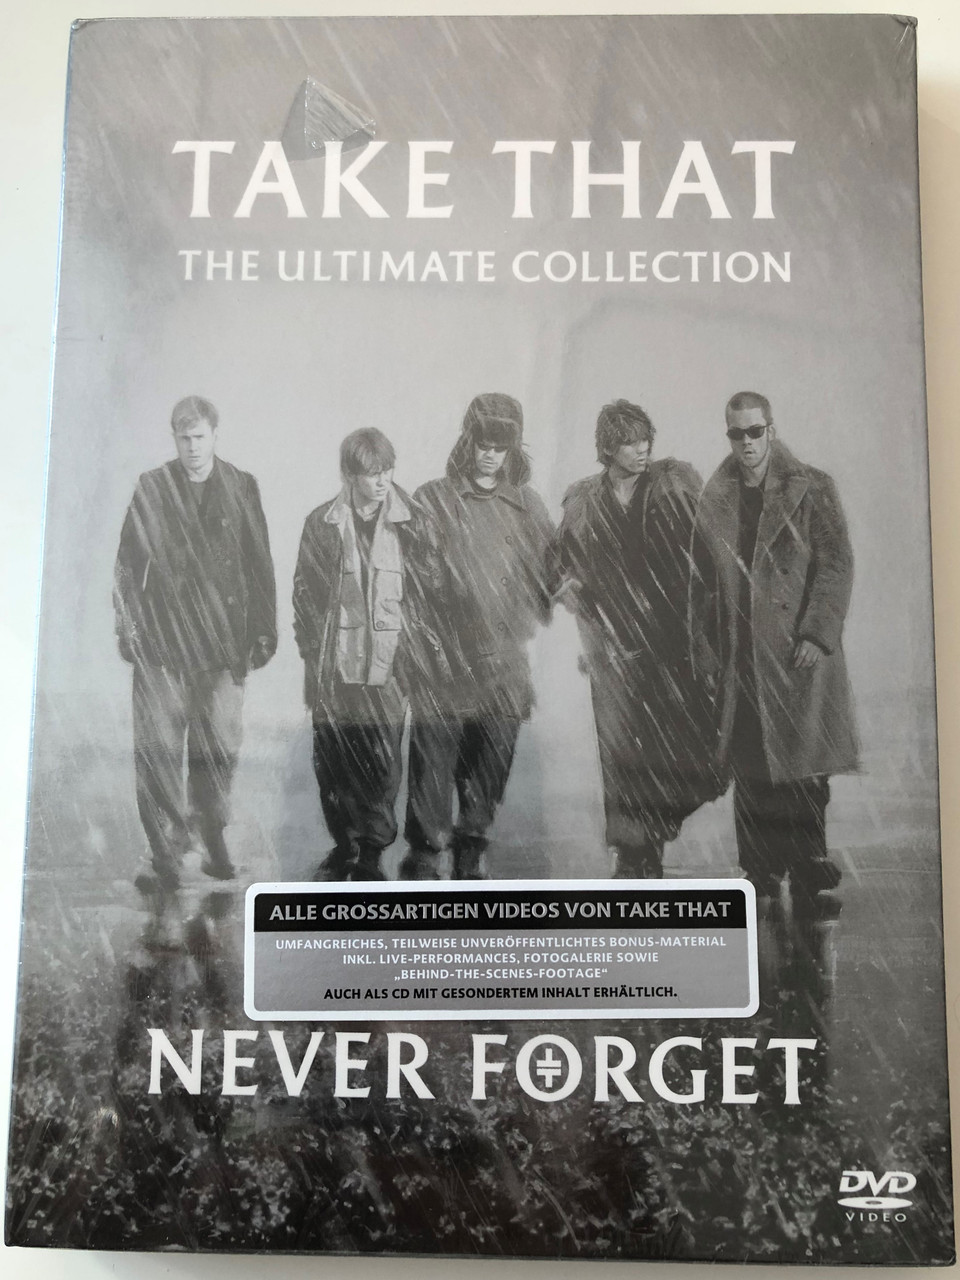 Take That - The Ultimate Collection DVD 2005 Never Forget / Music Videos,  Live Performances, Extras, Behind the Scenes / Sony BMG - bibleinmylanguage